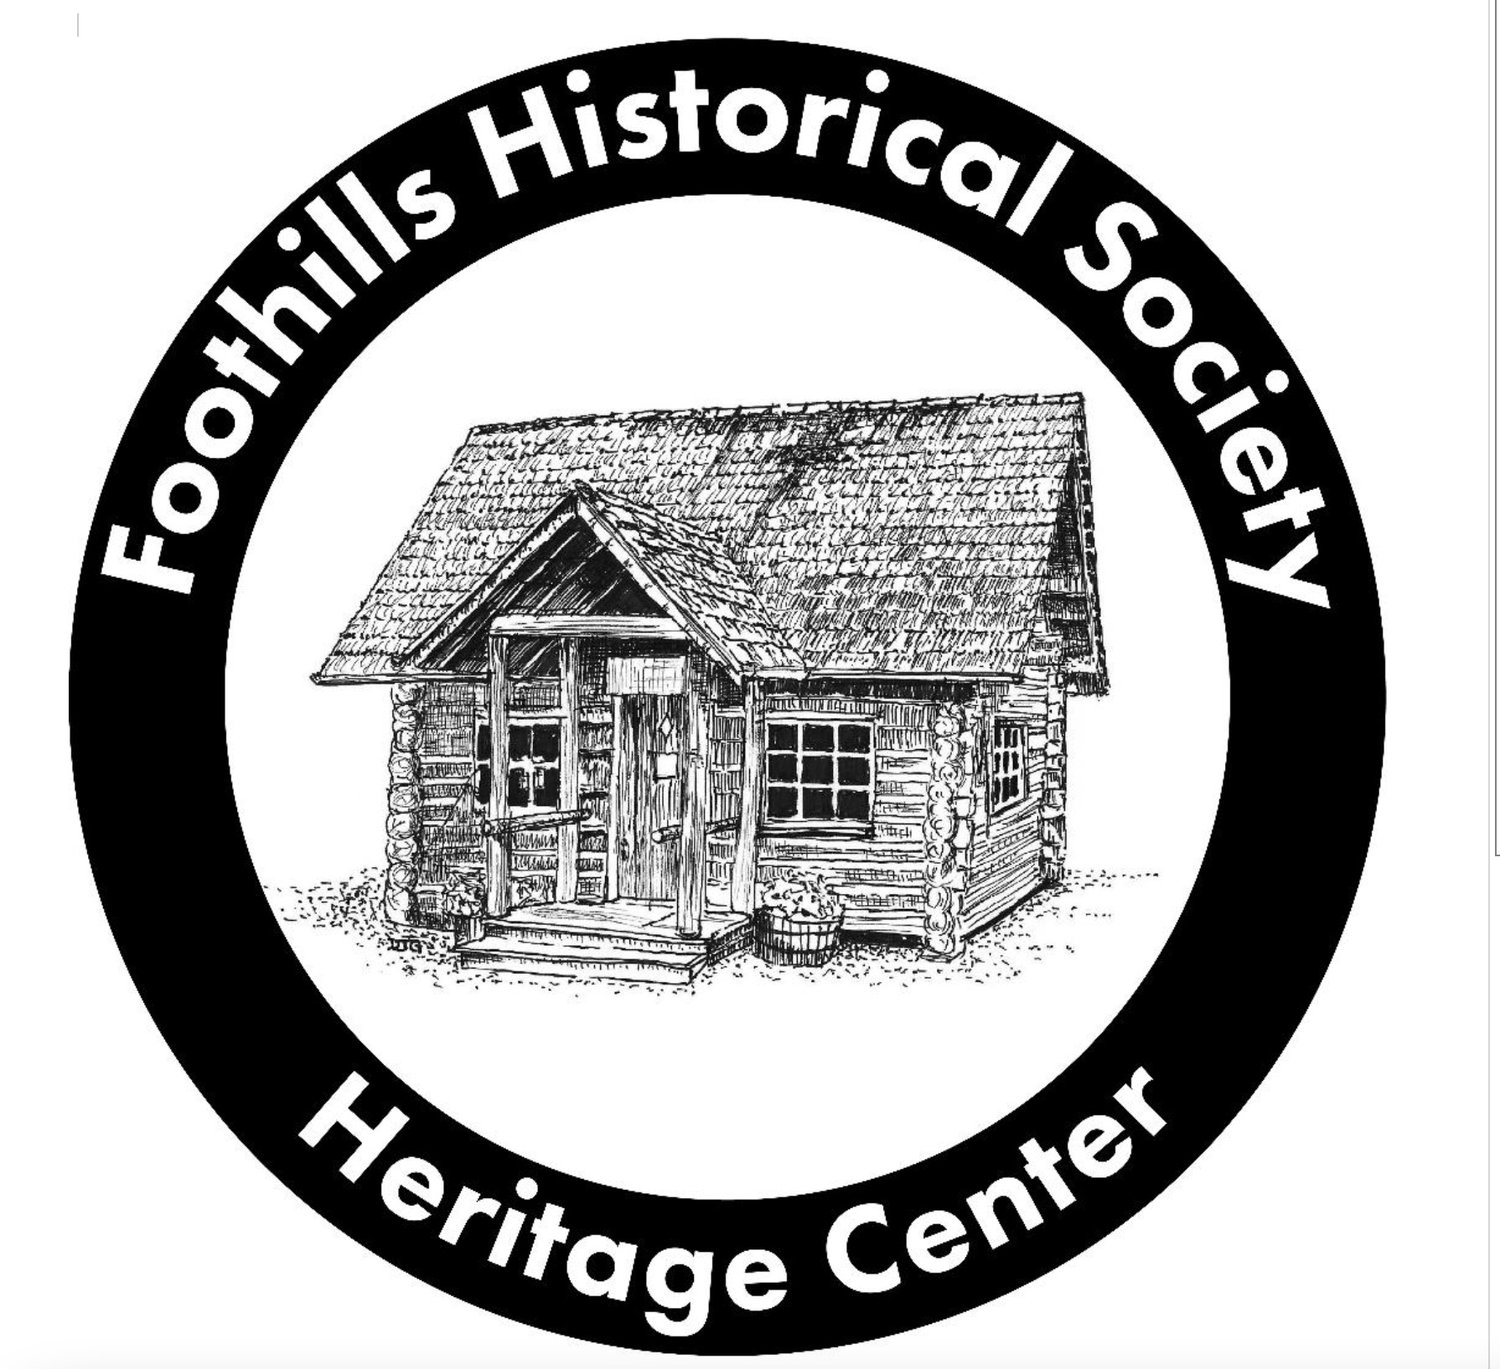 Foothills Historical Museum